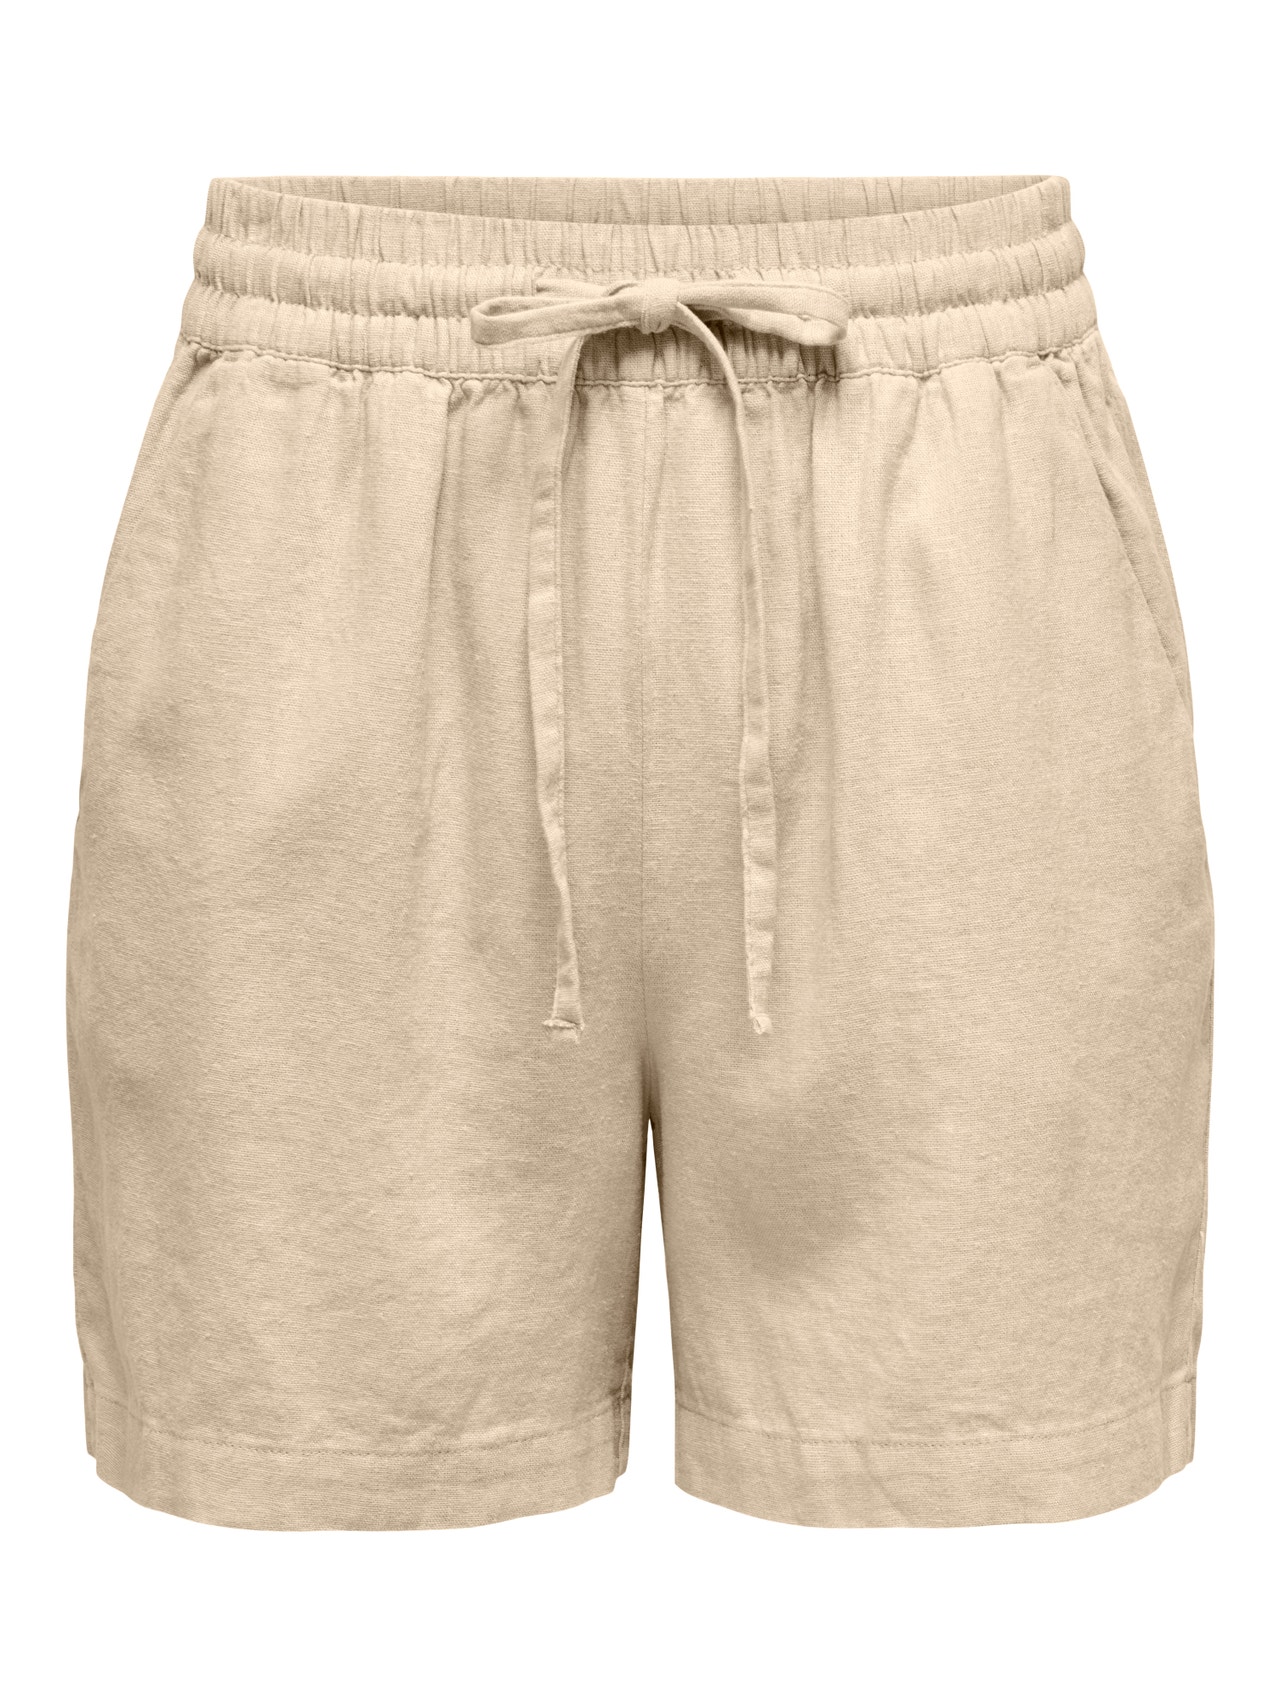 ONLY Normal passform Hög midja Shorts -Oatmeal - 15321518